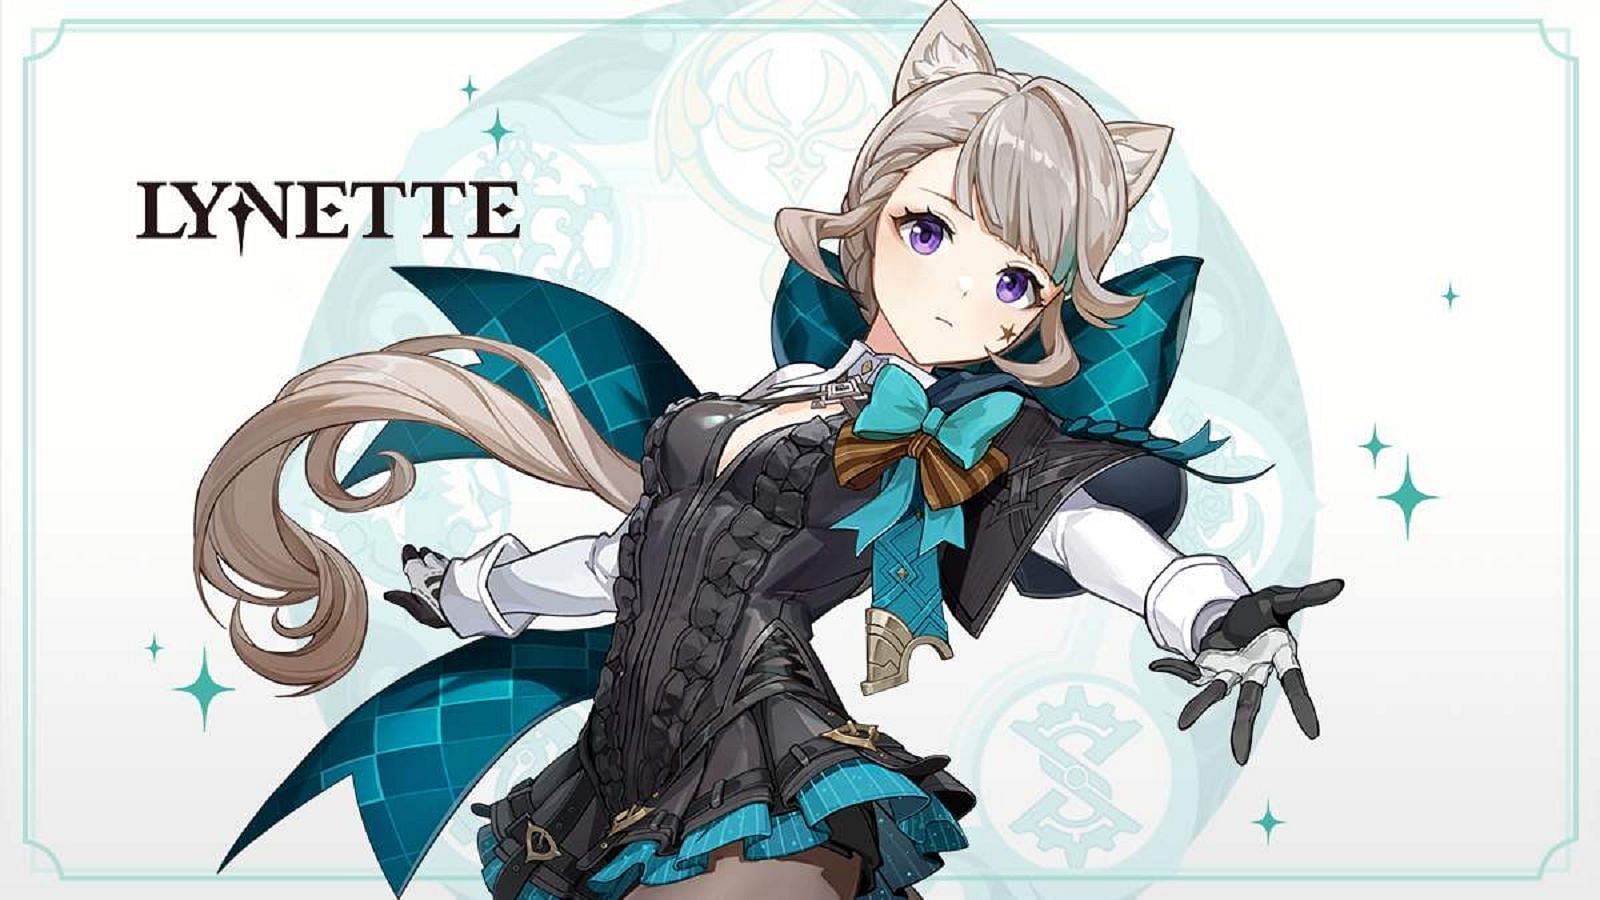 Lynette will be released in version 4.0 (Image via HoYoverse)